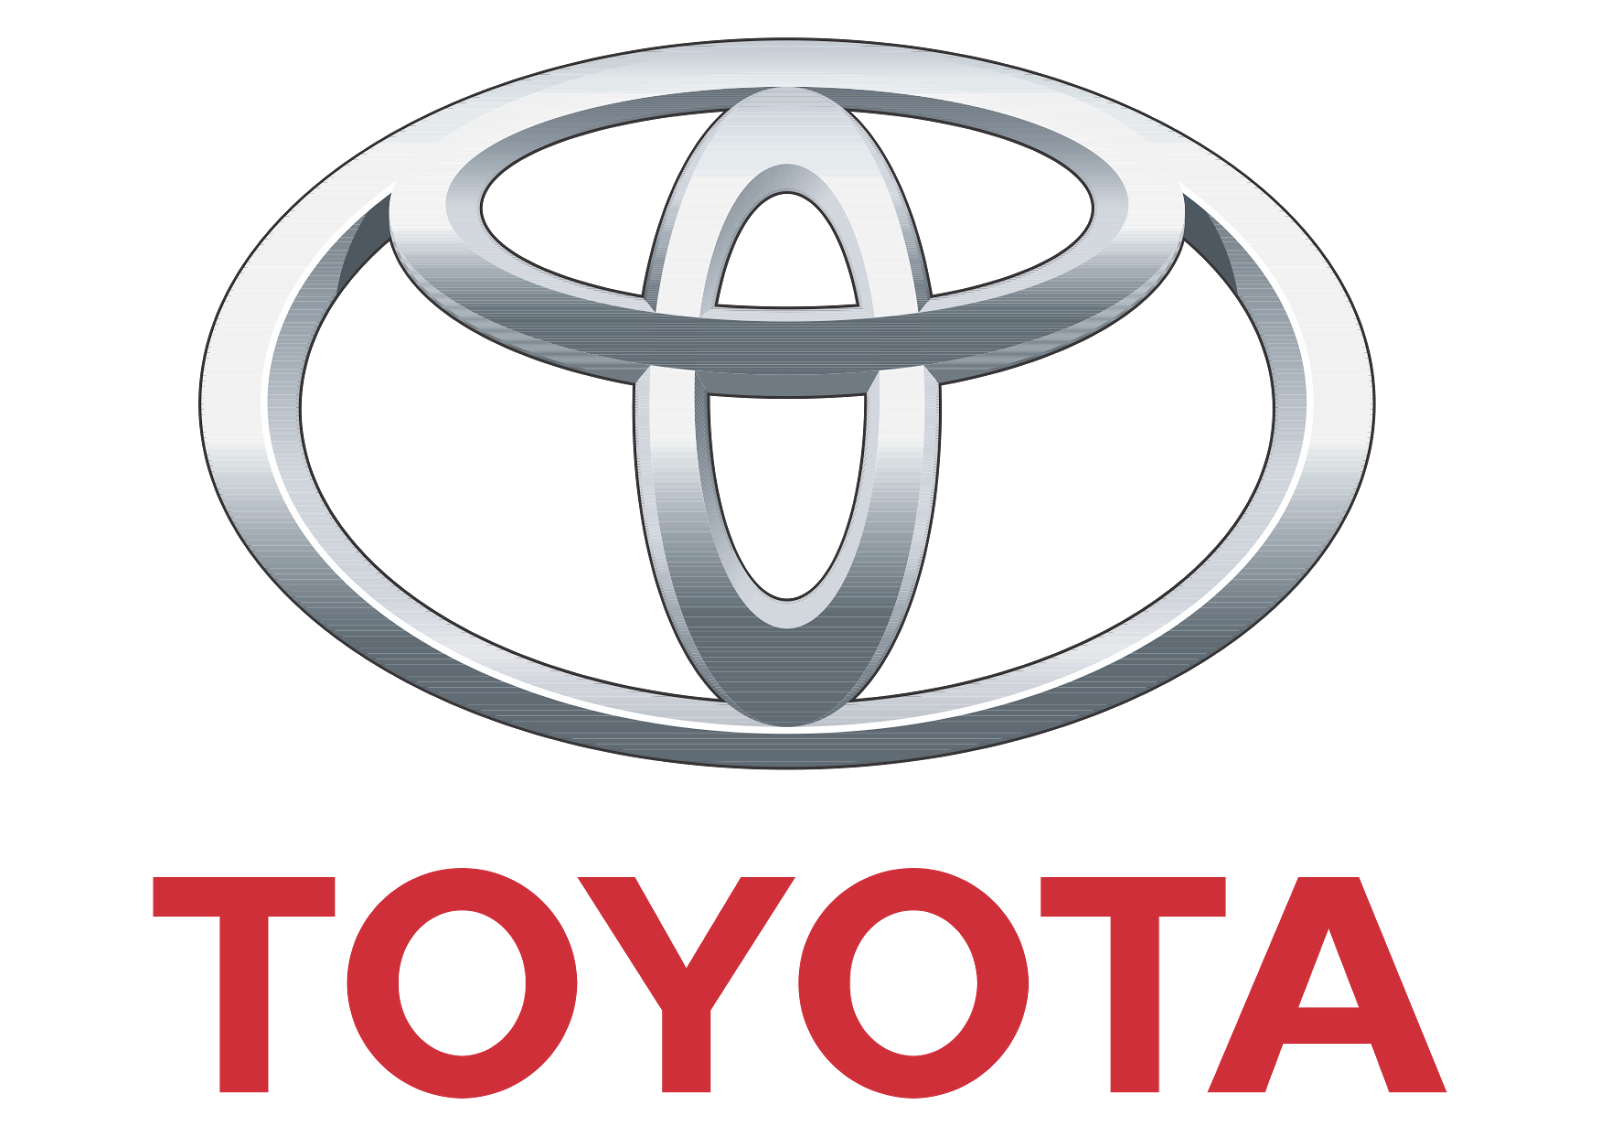 Toyota Logo Free Download Png Png Image - Toyota, Transparent background PNG HD thumbnail